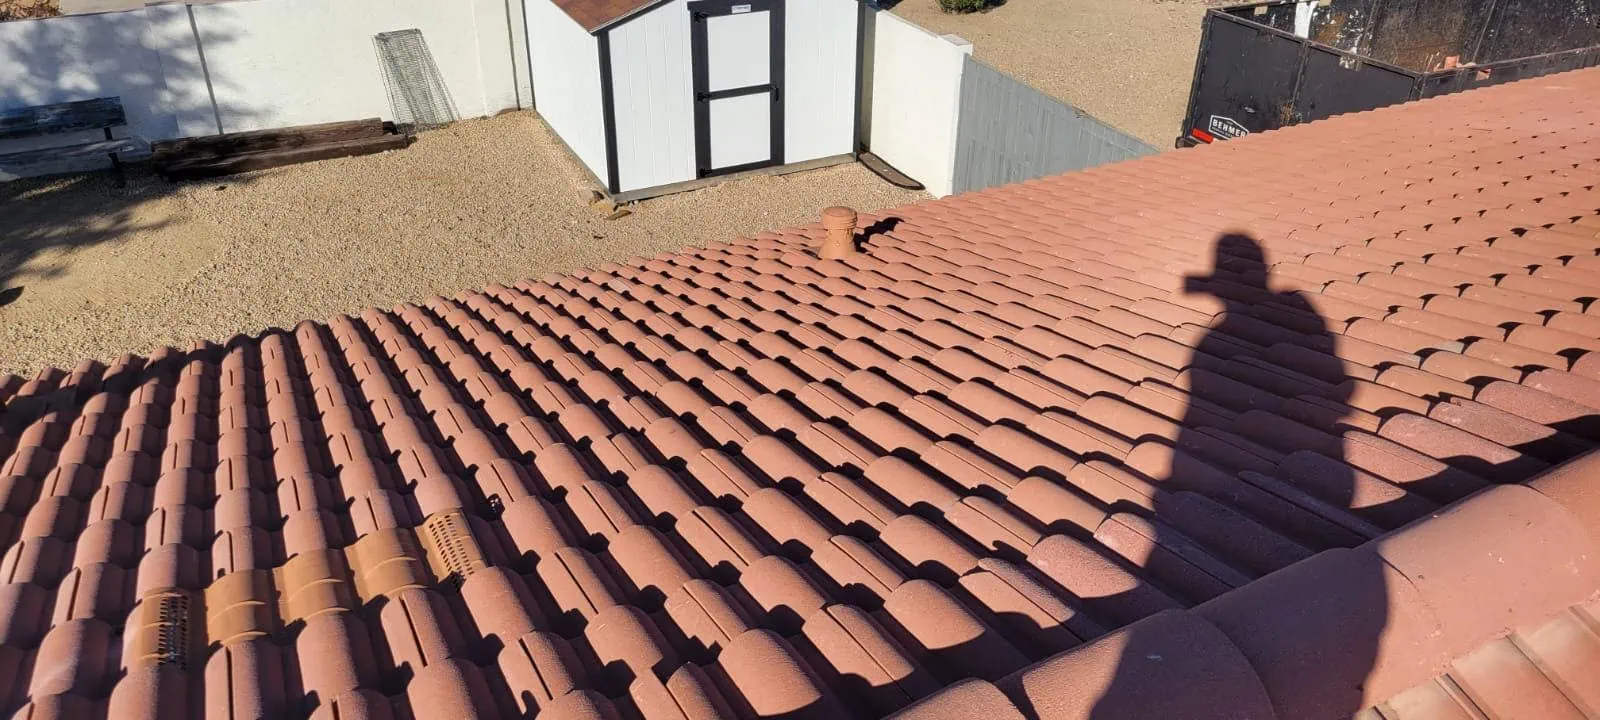 tile roofing job complete in paradise valley az